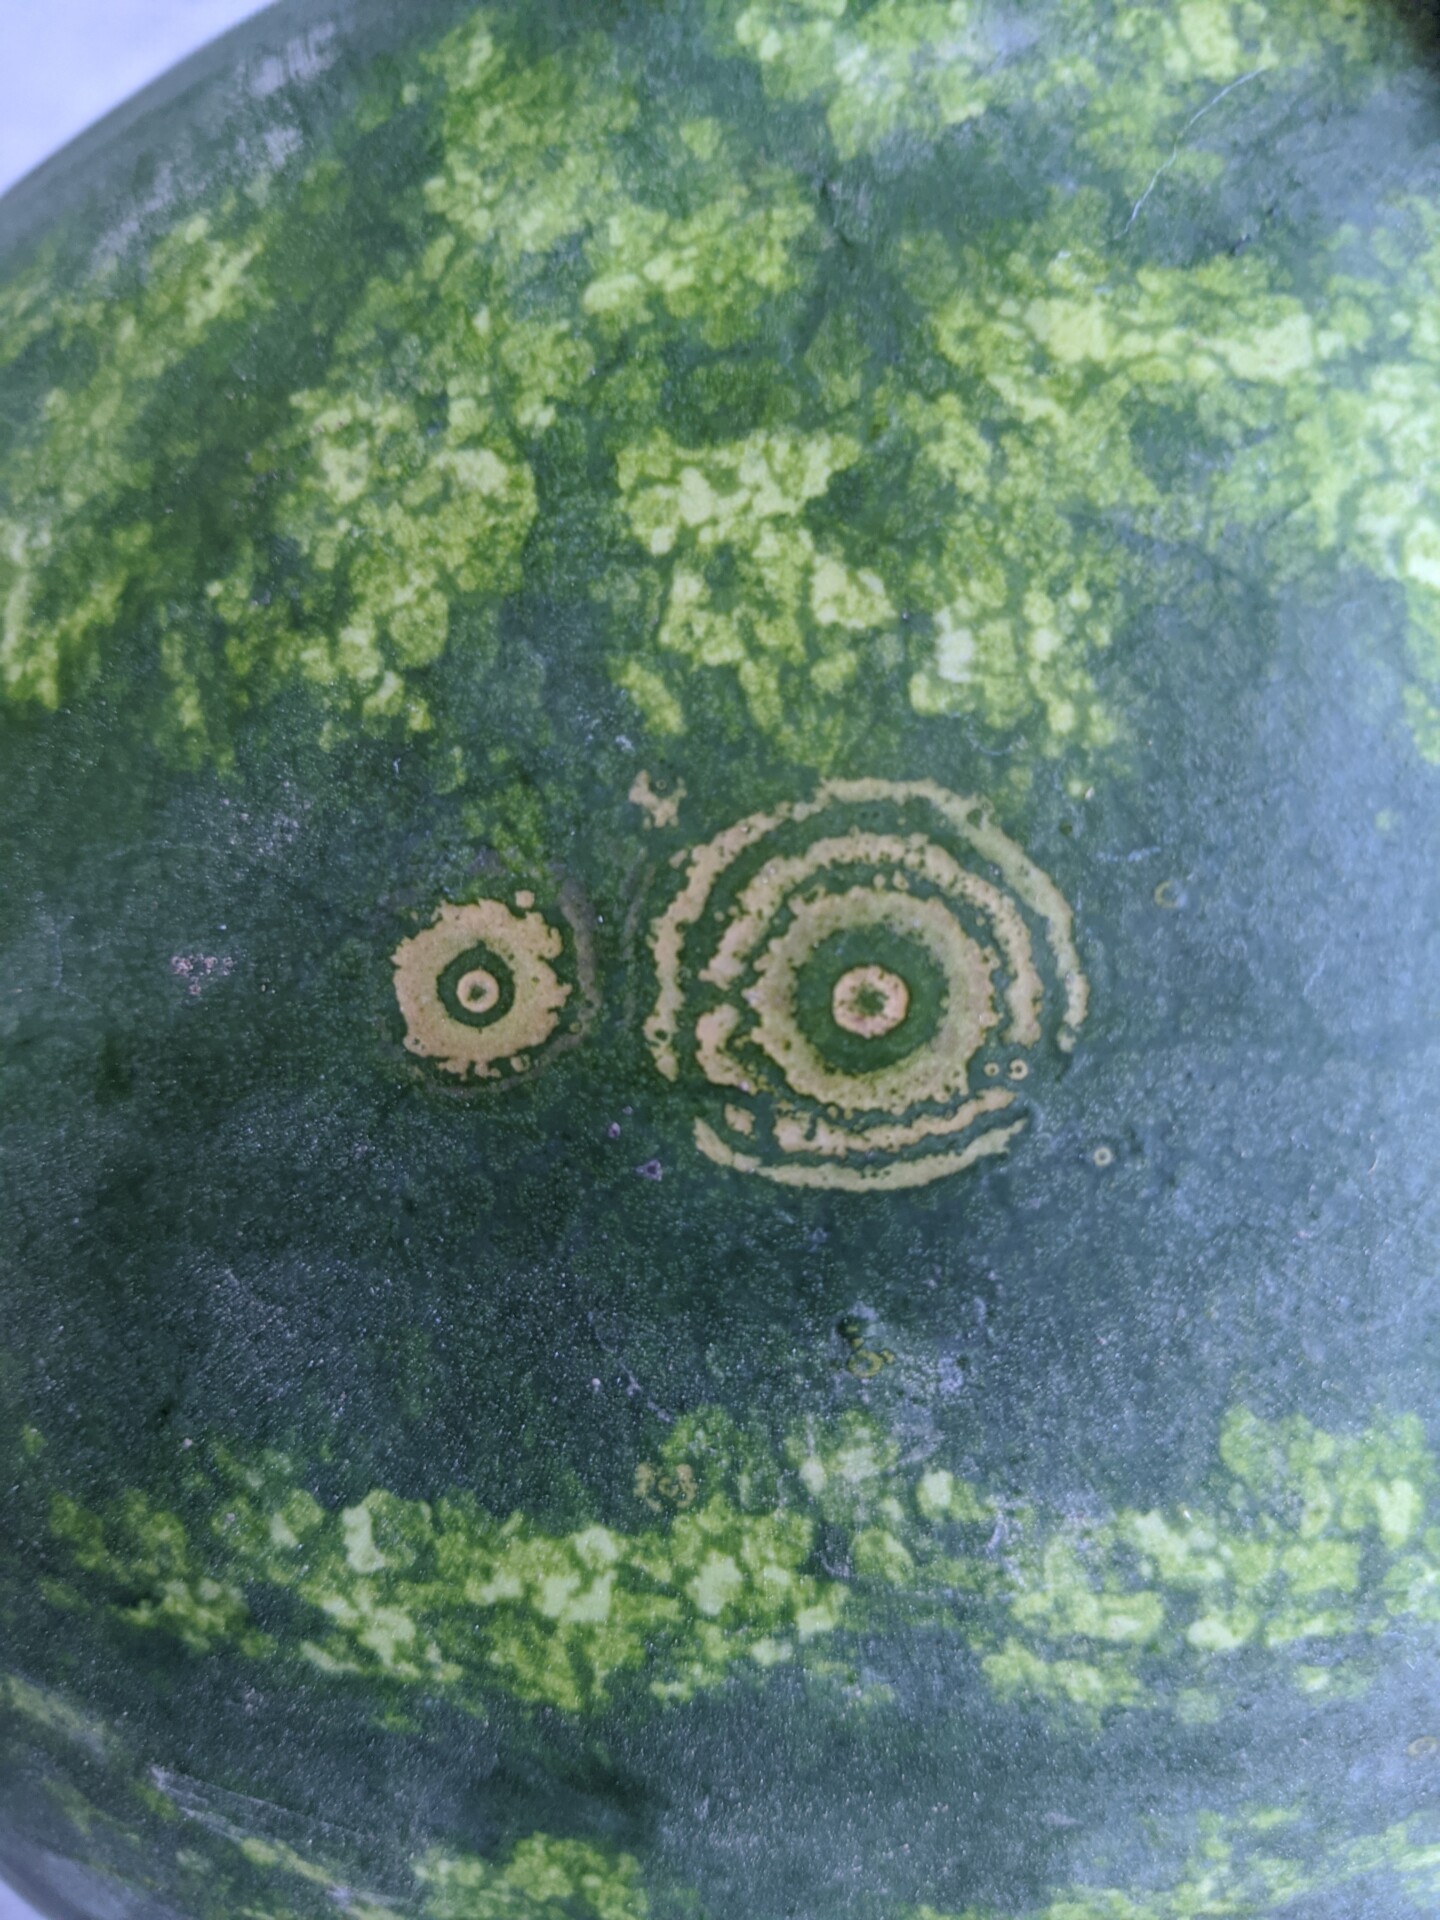 Figure 4. Target cluster of watermelon. Not analyzed for virus.